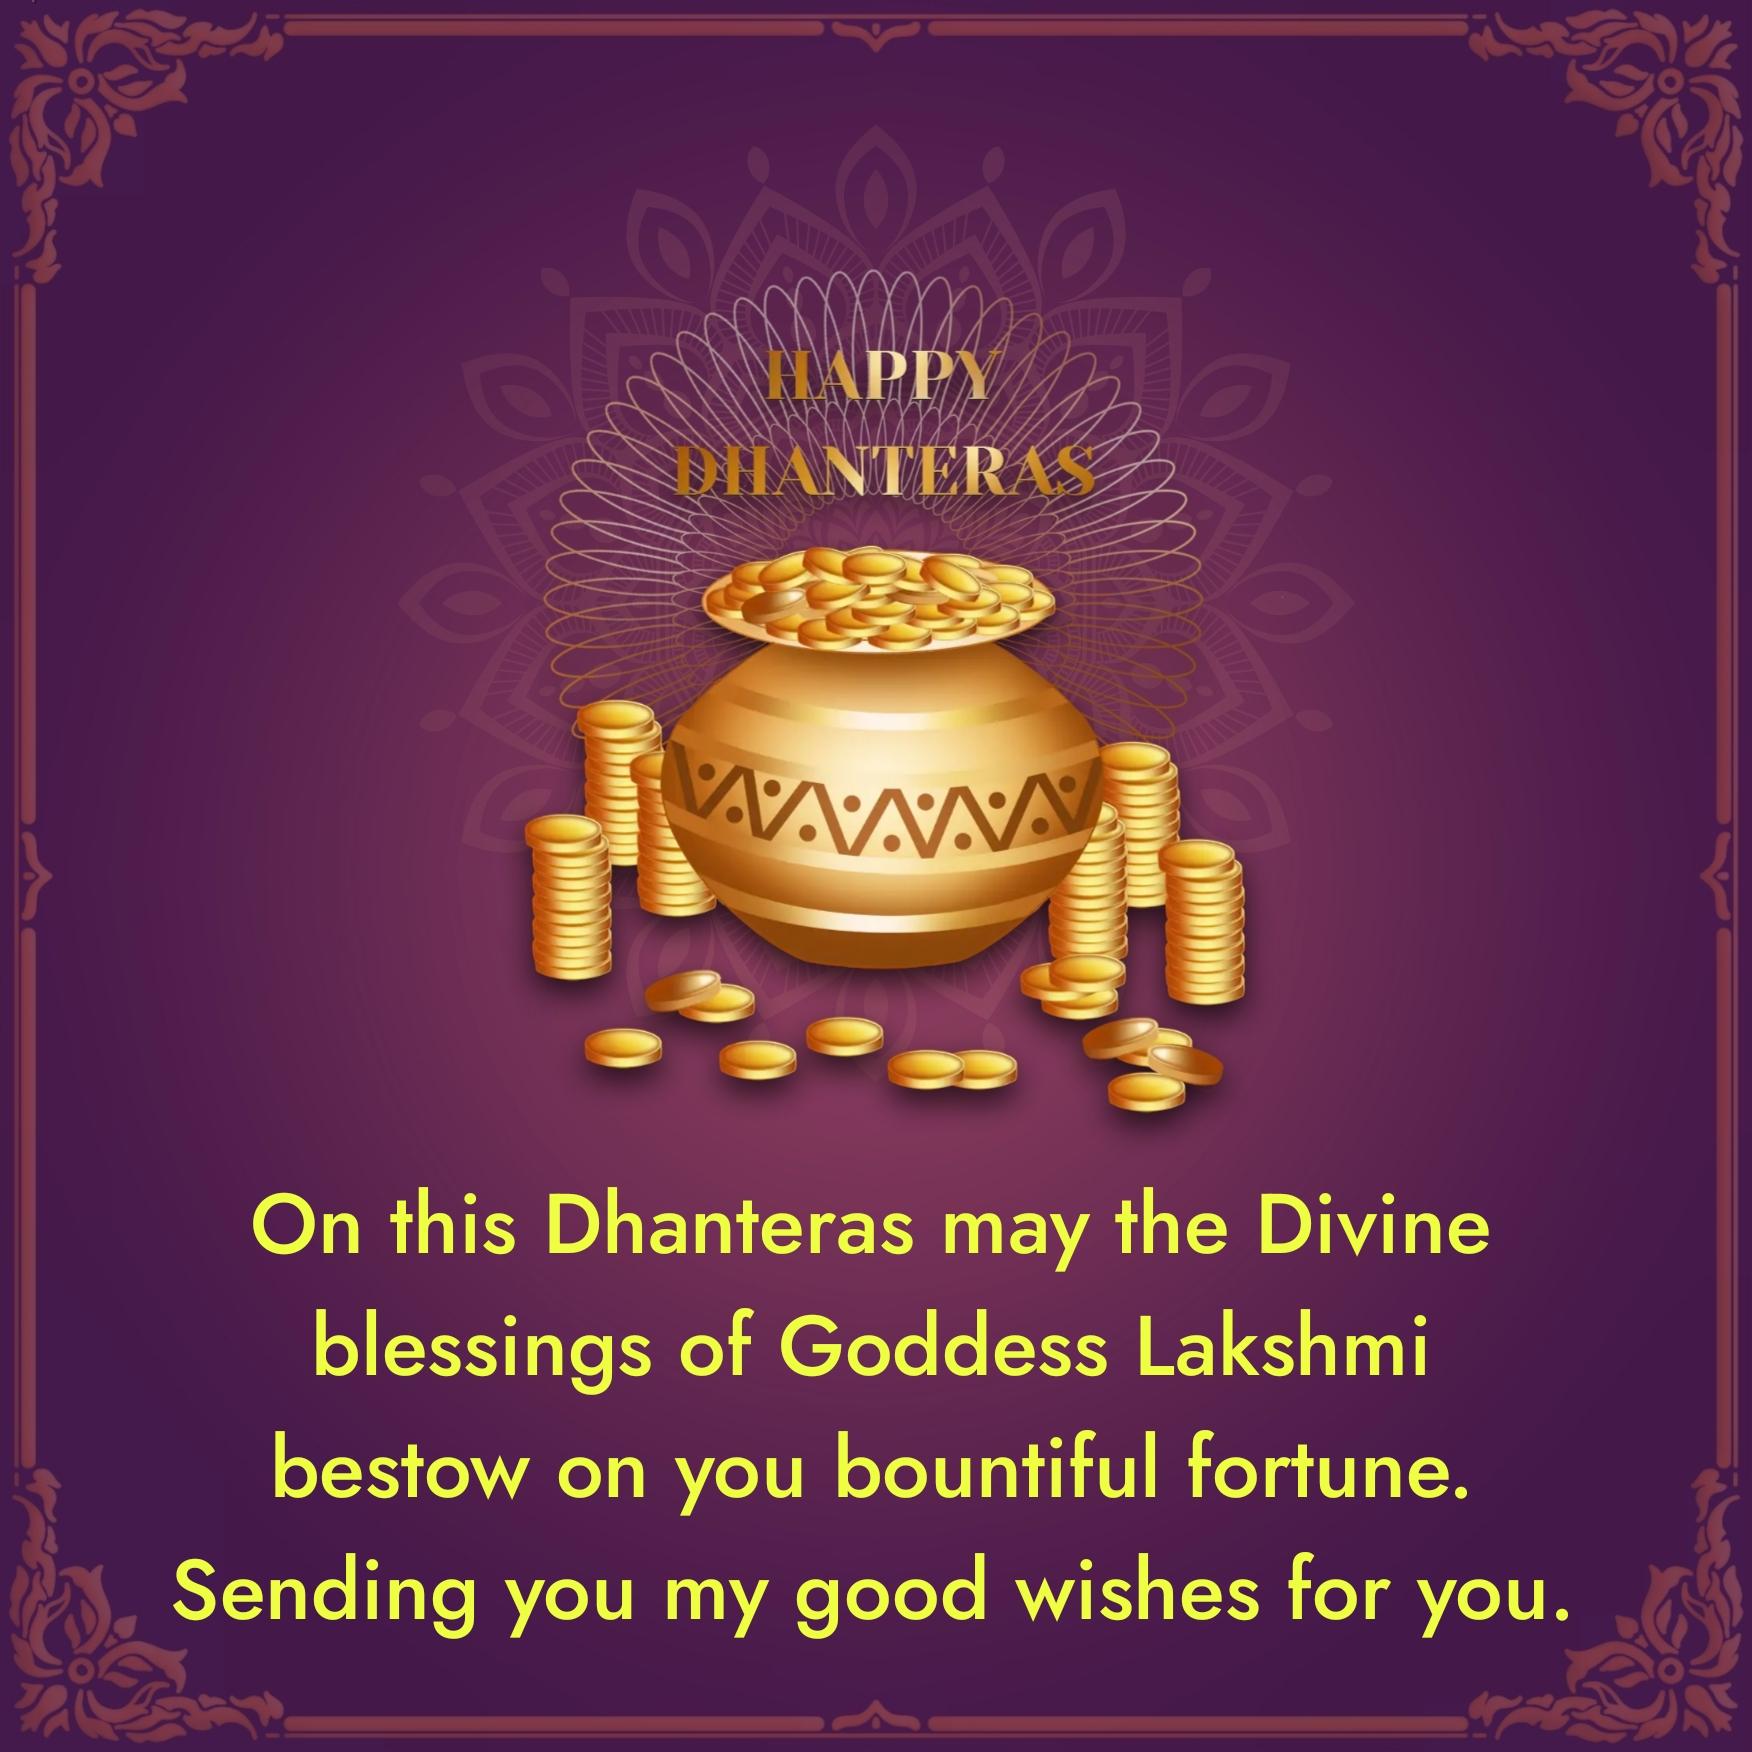 On this Dhanteras may the Divine blessings of Goddess Lakshmi